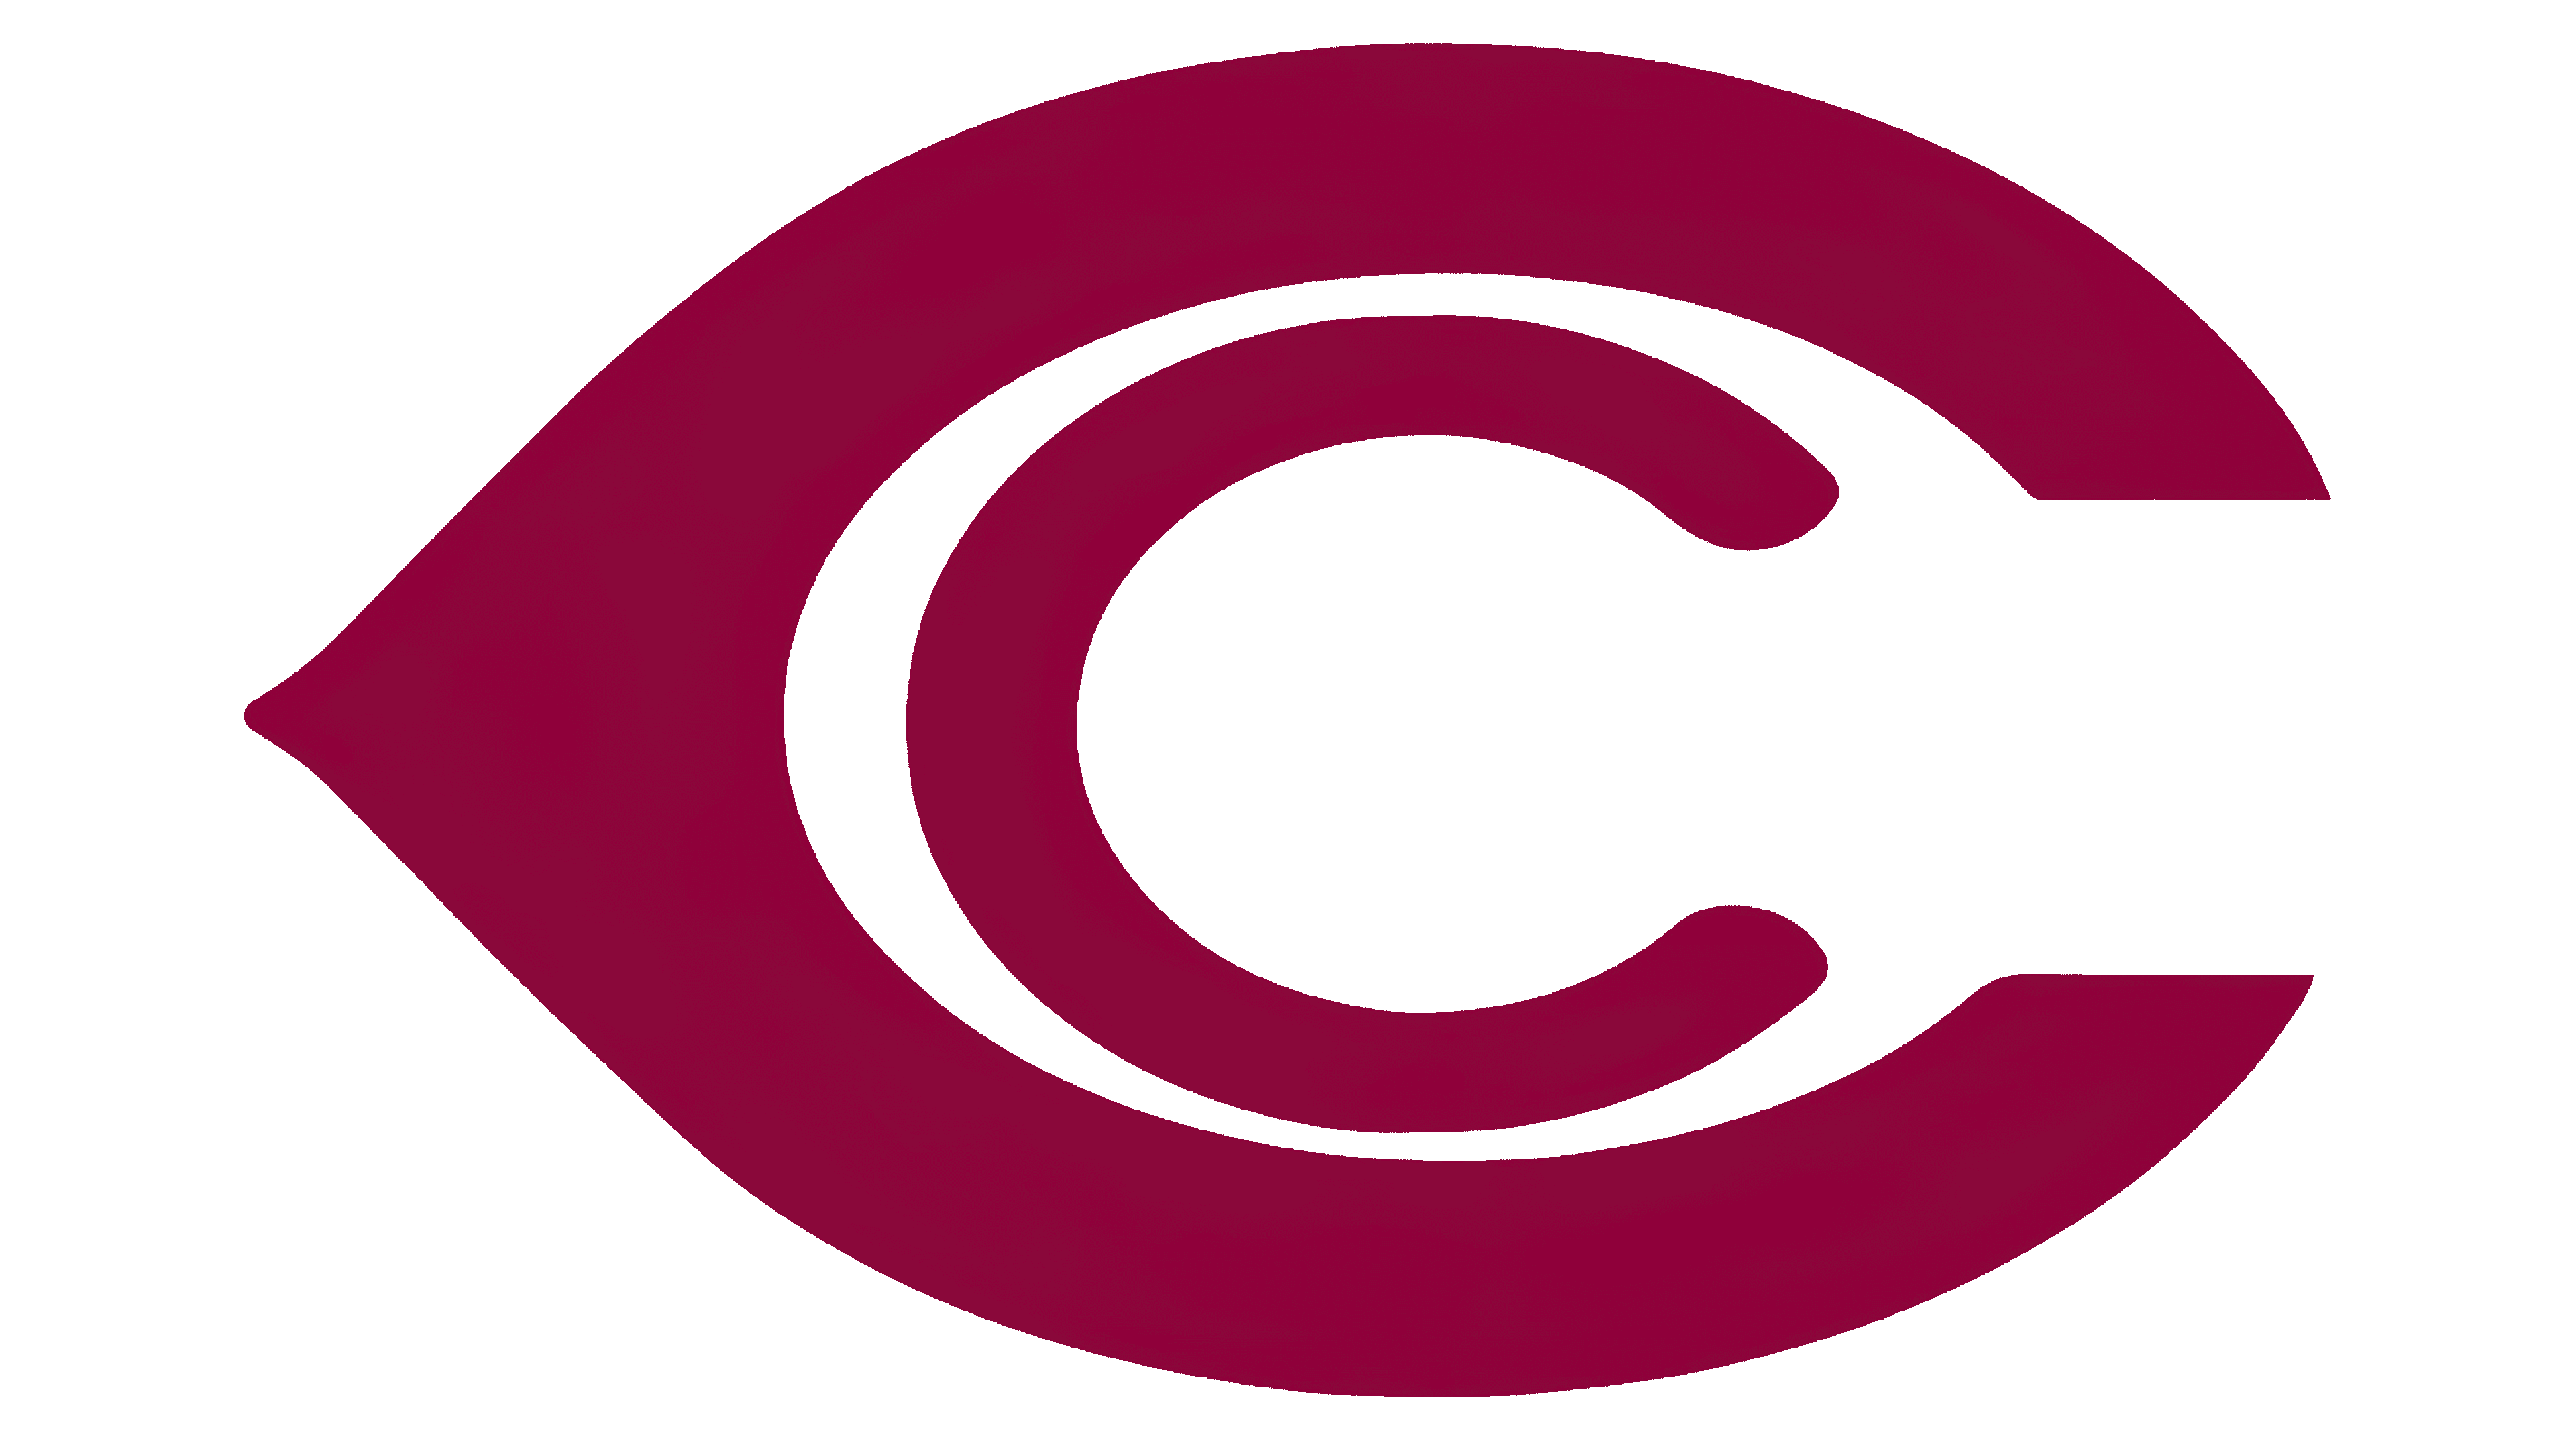 Chicago Cardinals Logo and sign, new logo meaning and history, PNG, SVG